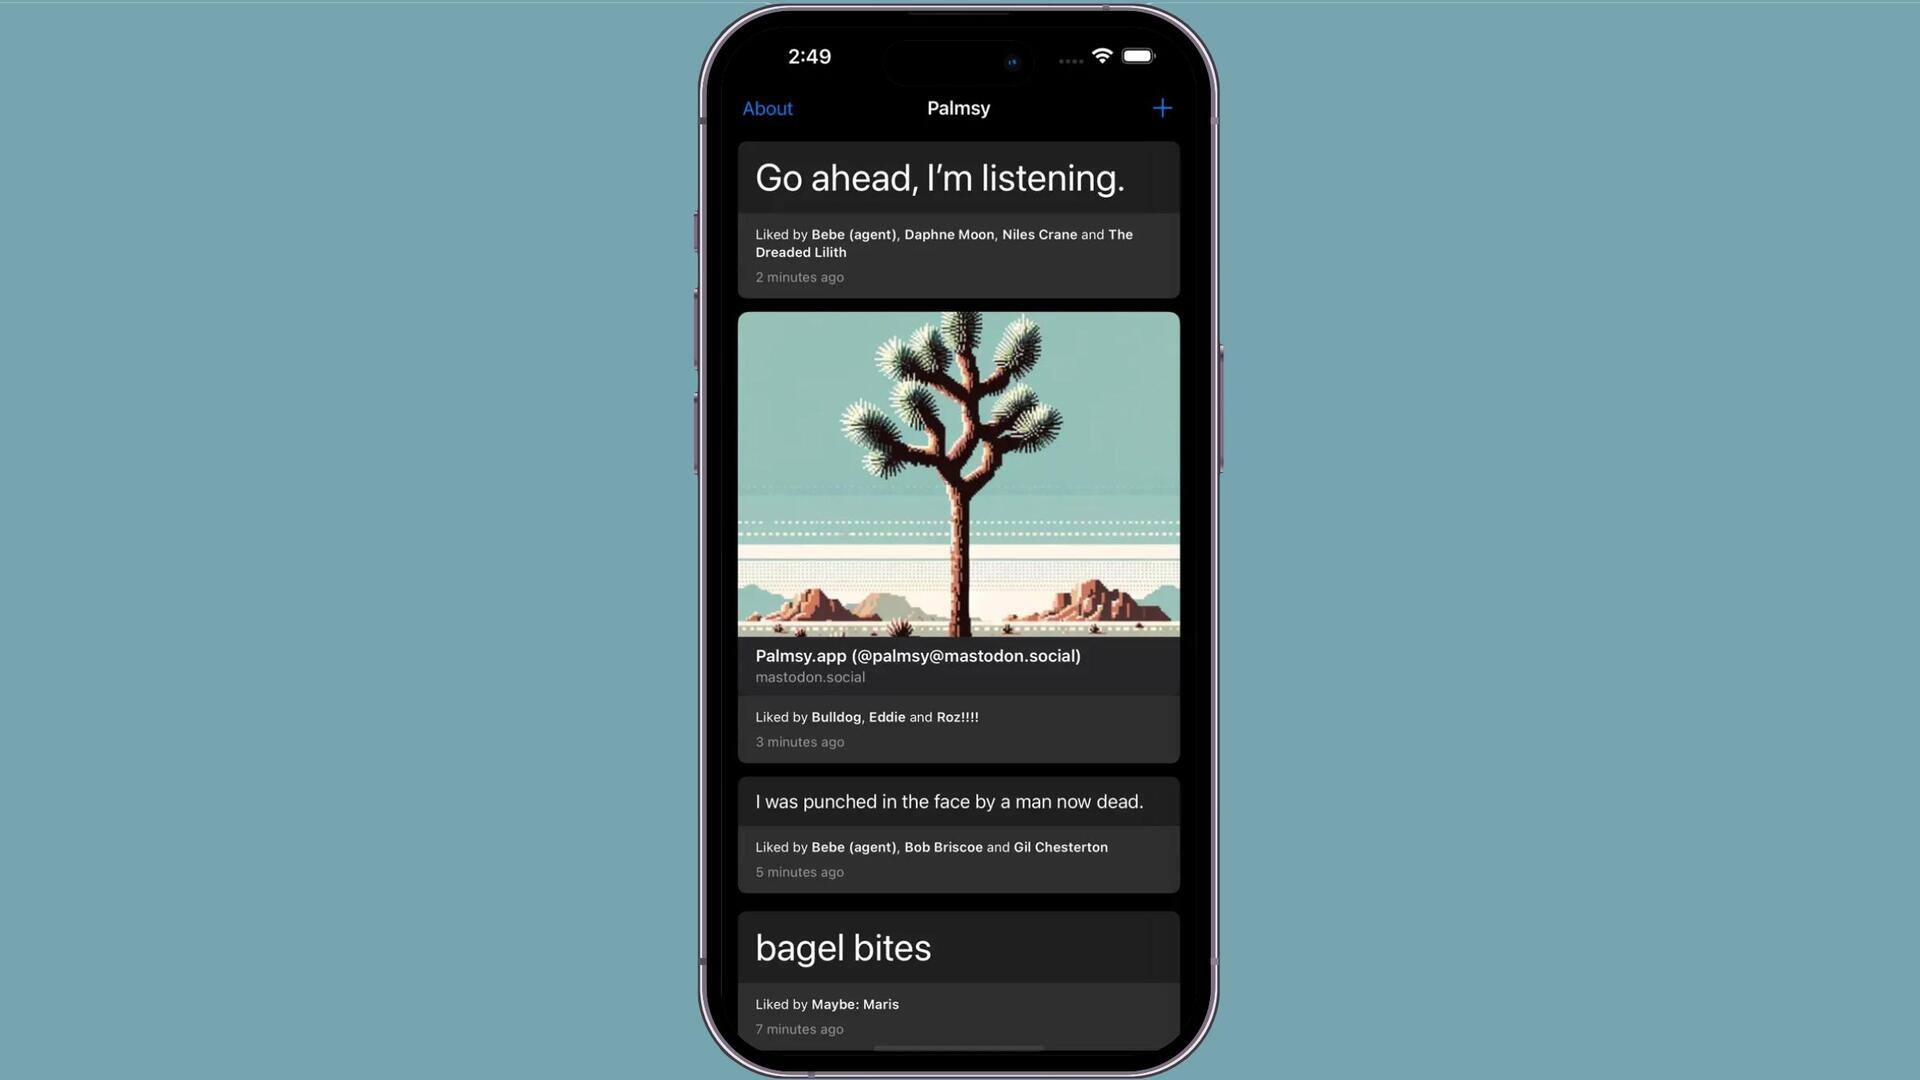 Meet Palmsy: A journaling app with social media spin